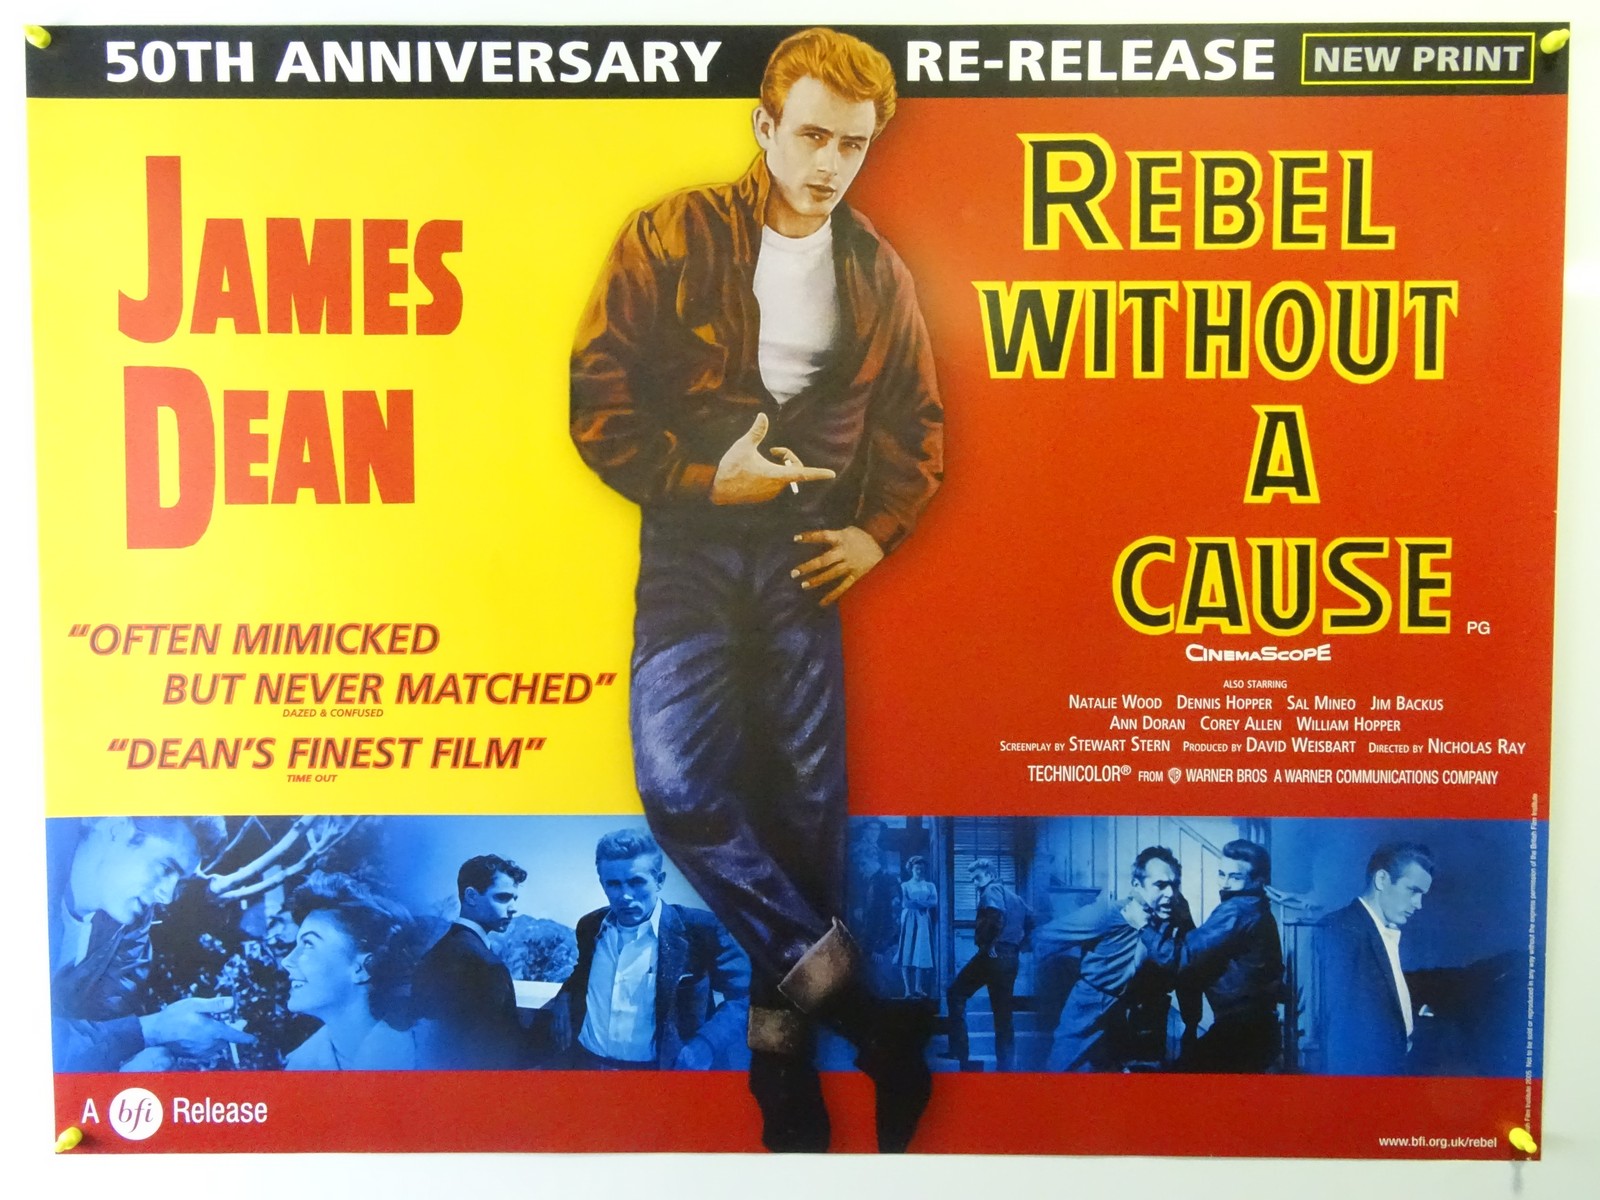 Lot 36 - REBEL WITHOUT A CAUSE (2005 RR) - UK Quad